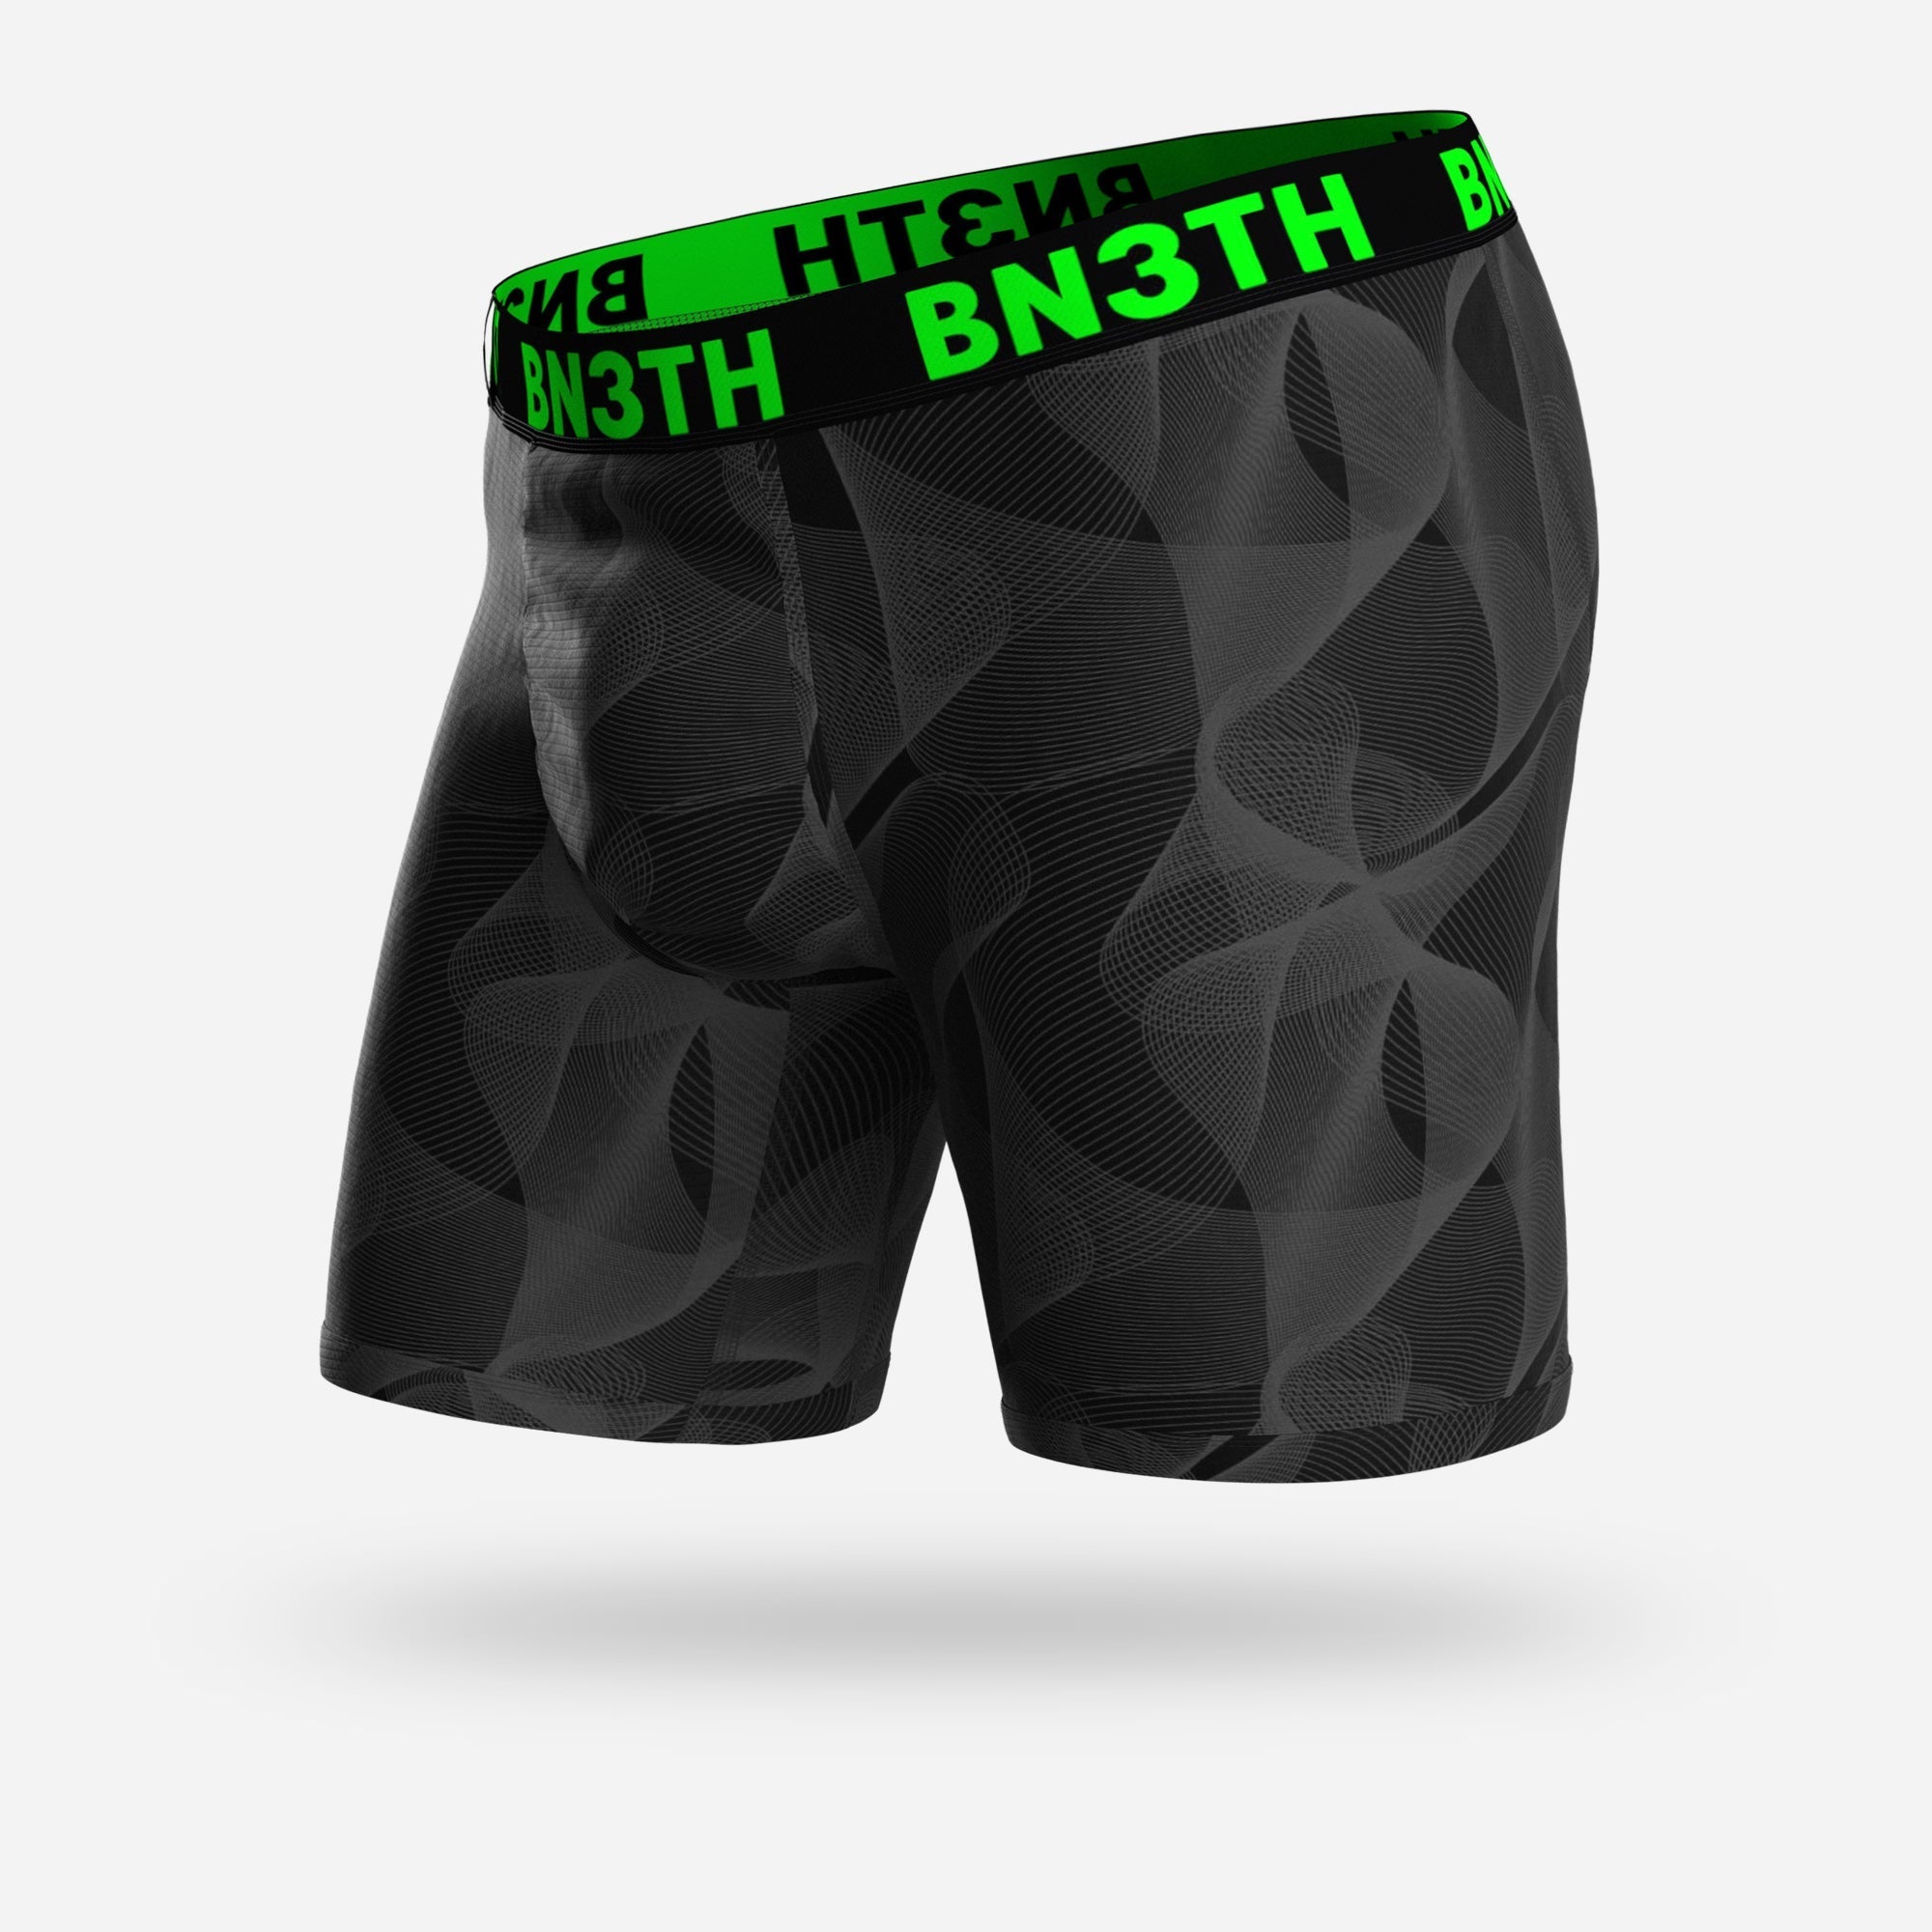 BN3TH Men's PRO IONIC Boxer Brief Black/White - Play Stores Inc